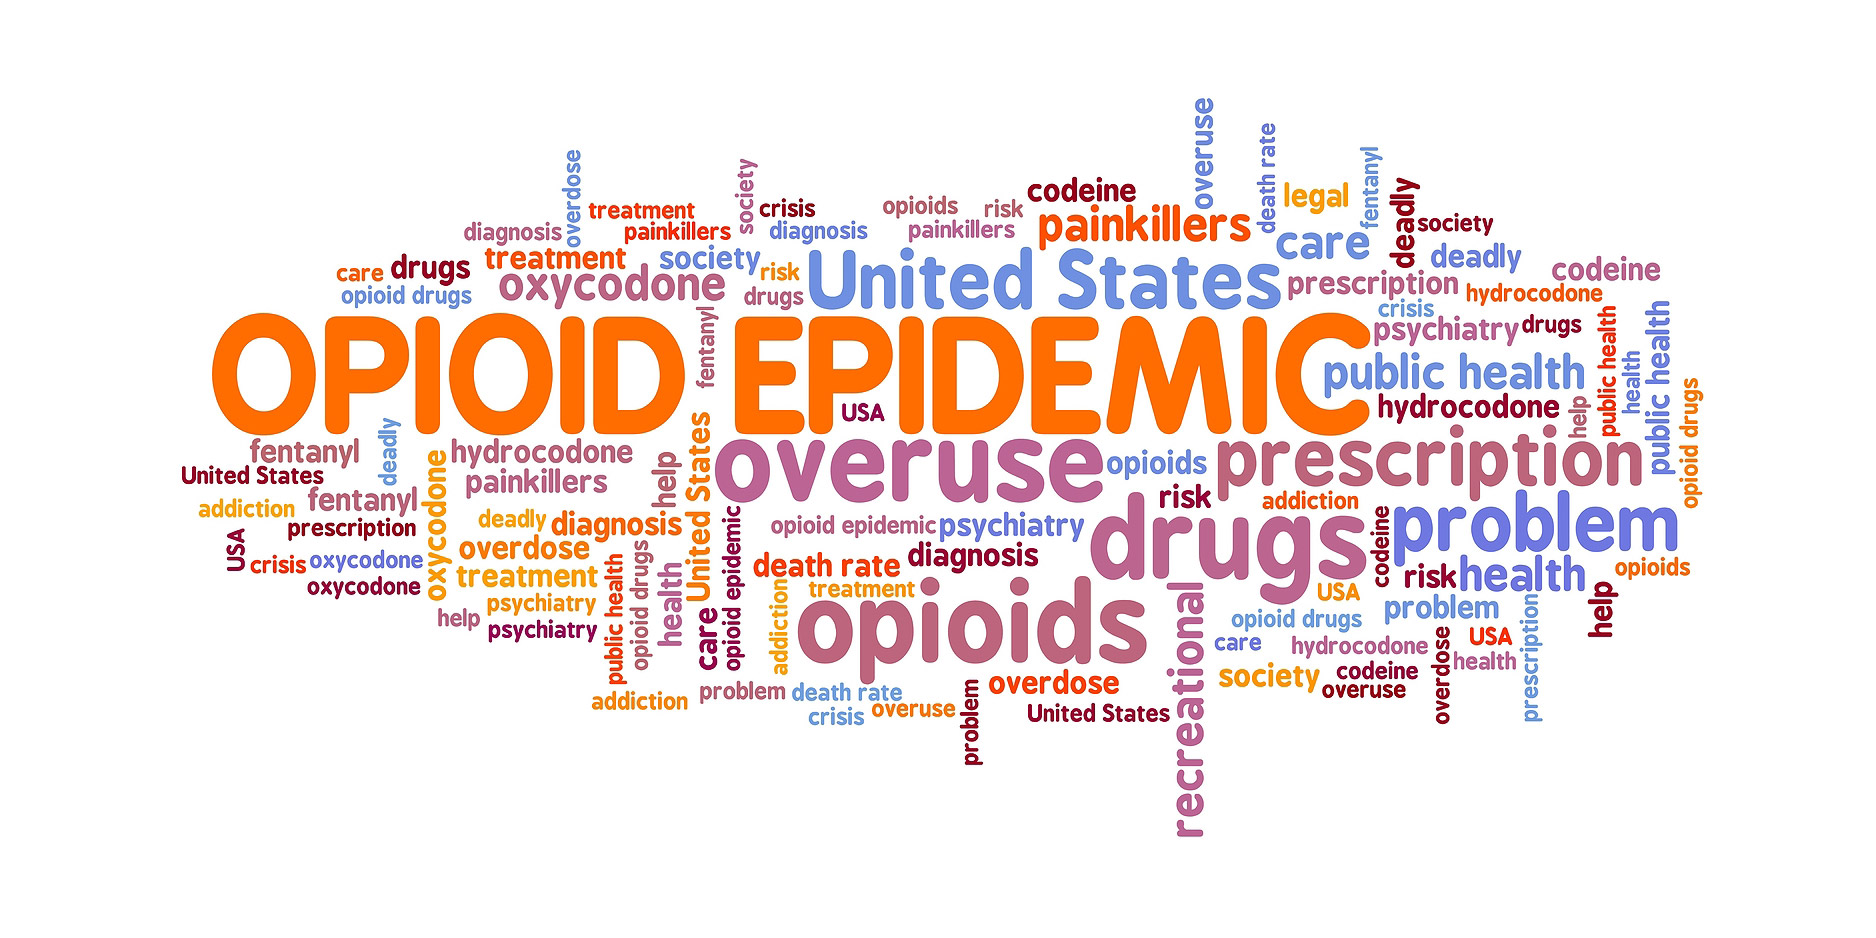 Opioid epidemic or opioid crisis in the United States. Word cloud concept.